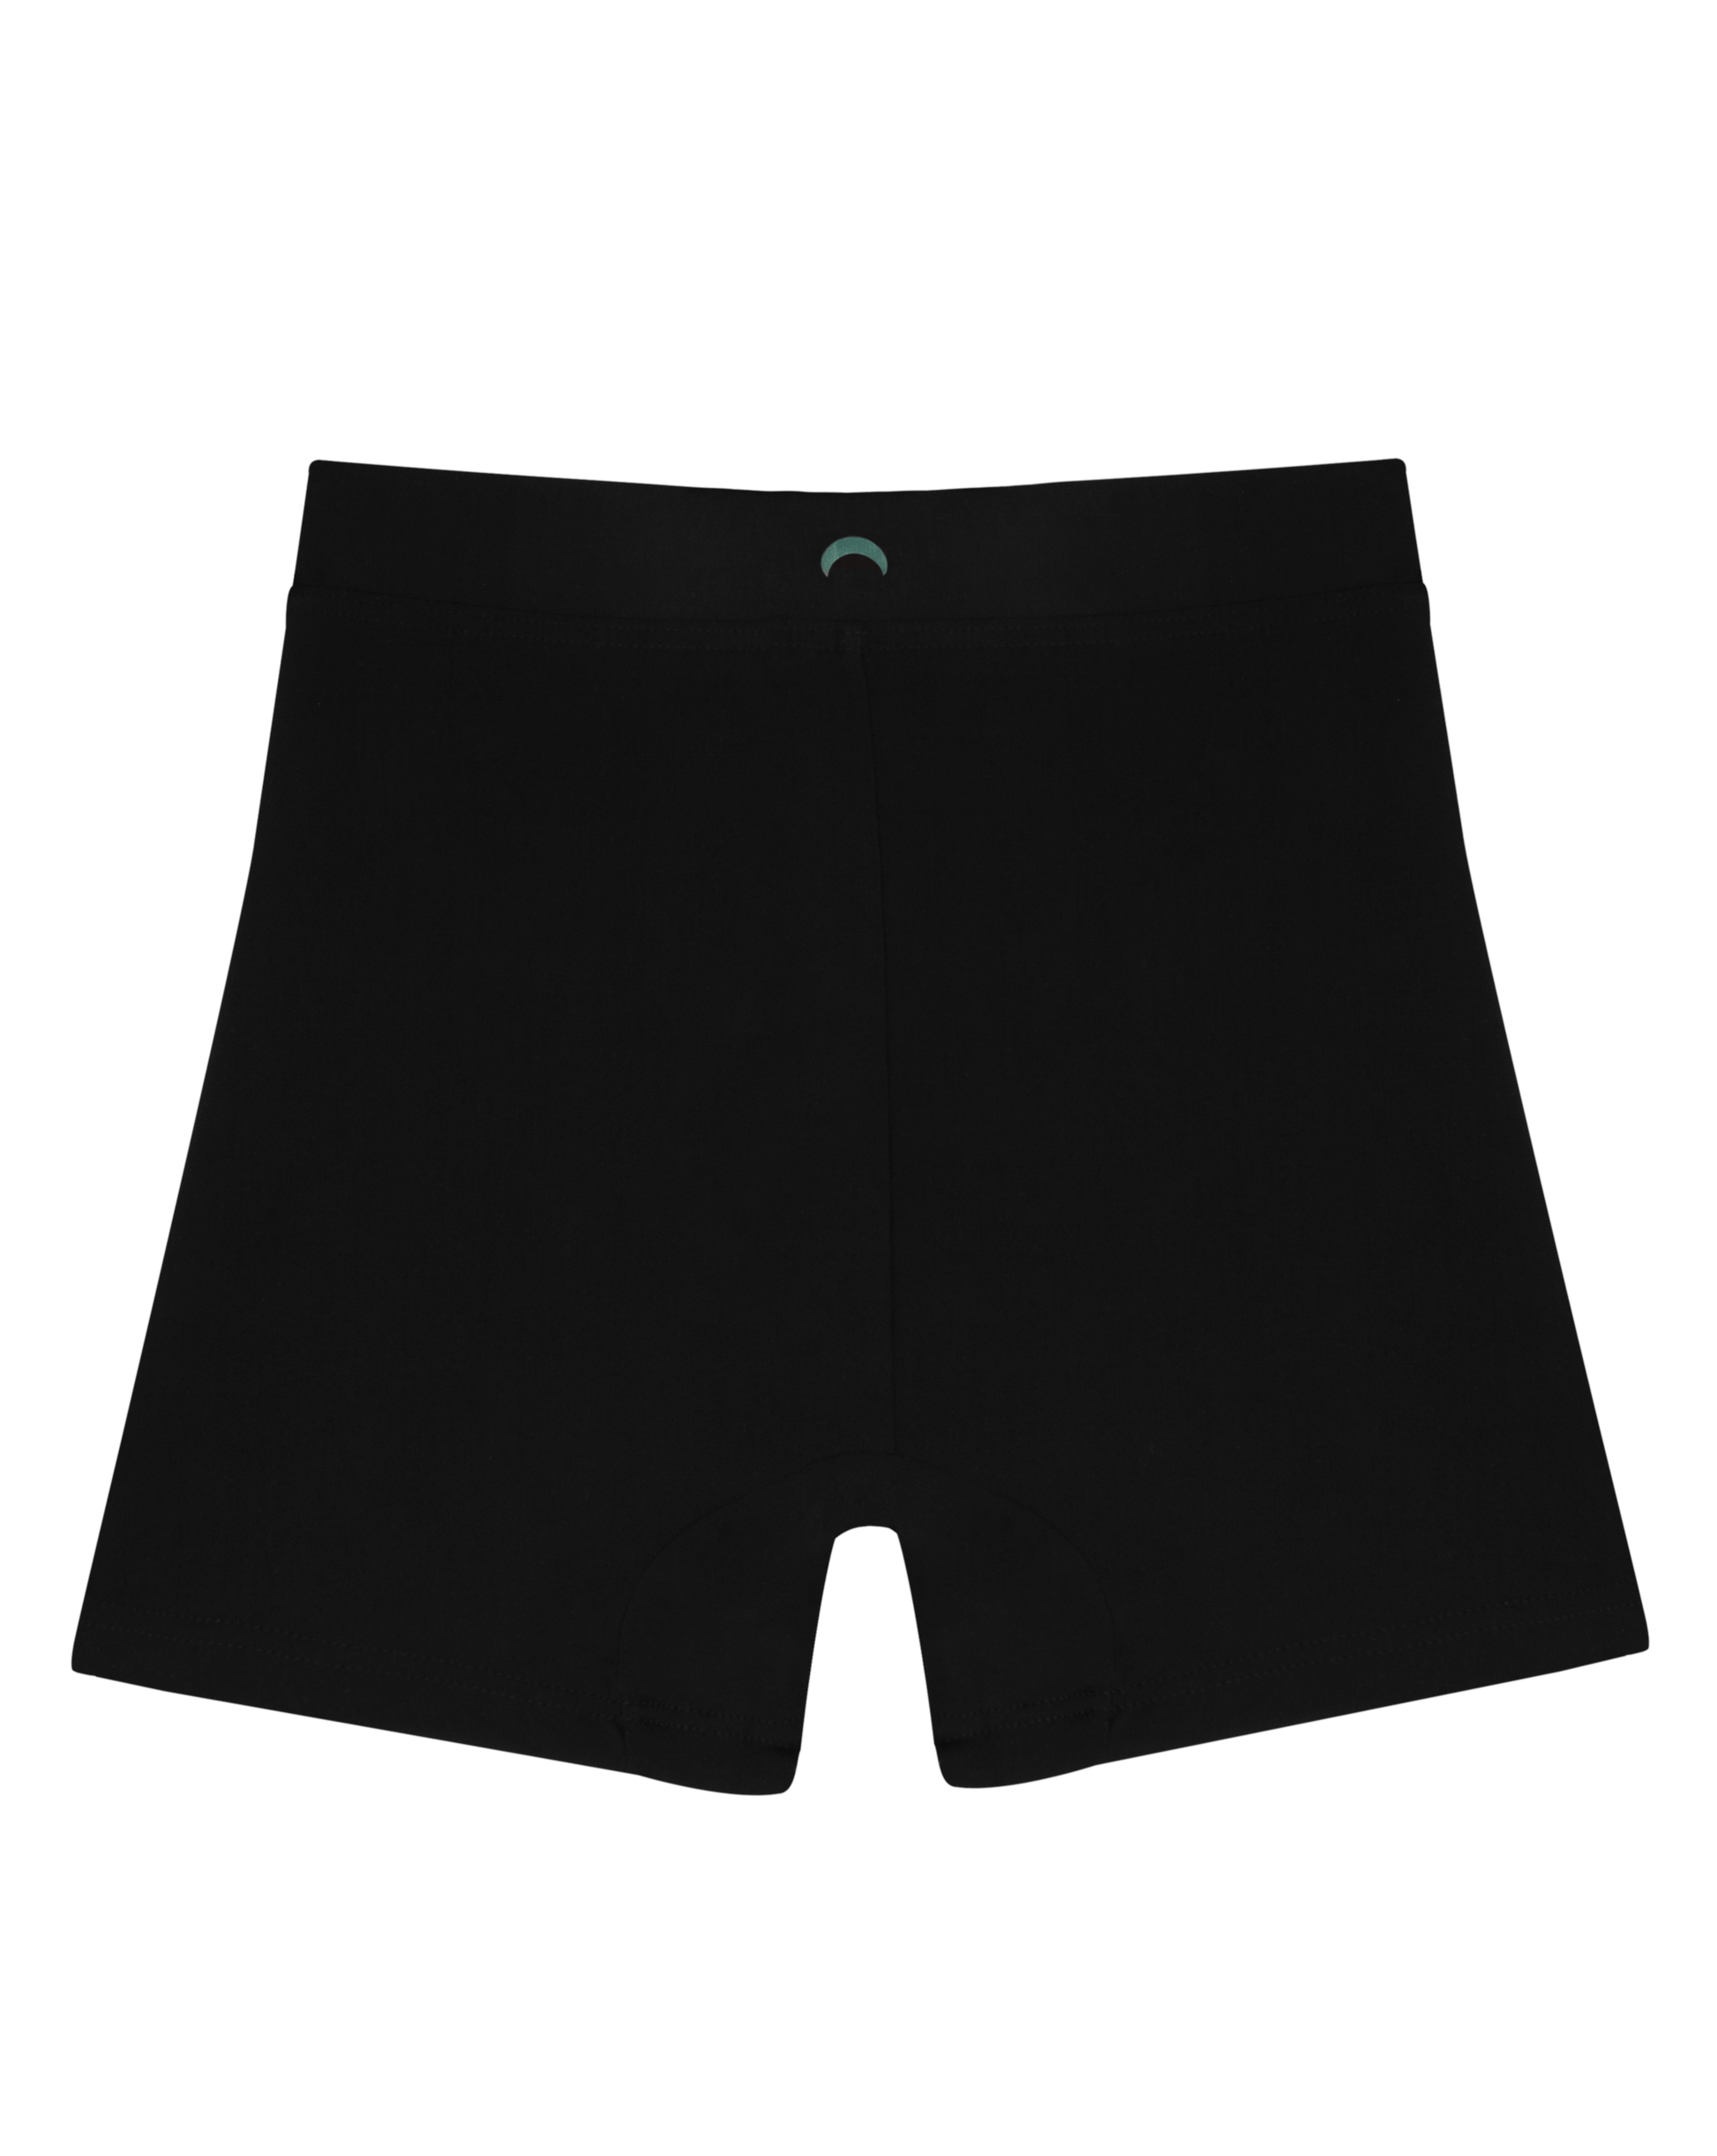 Boxer briefs black, experience the comfort of Tencel Micro Modal